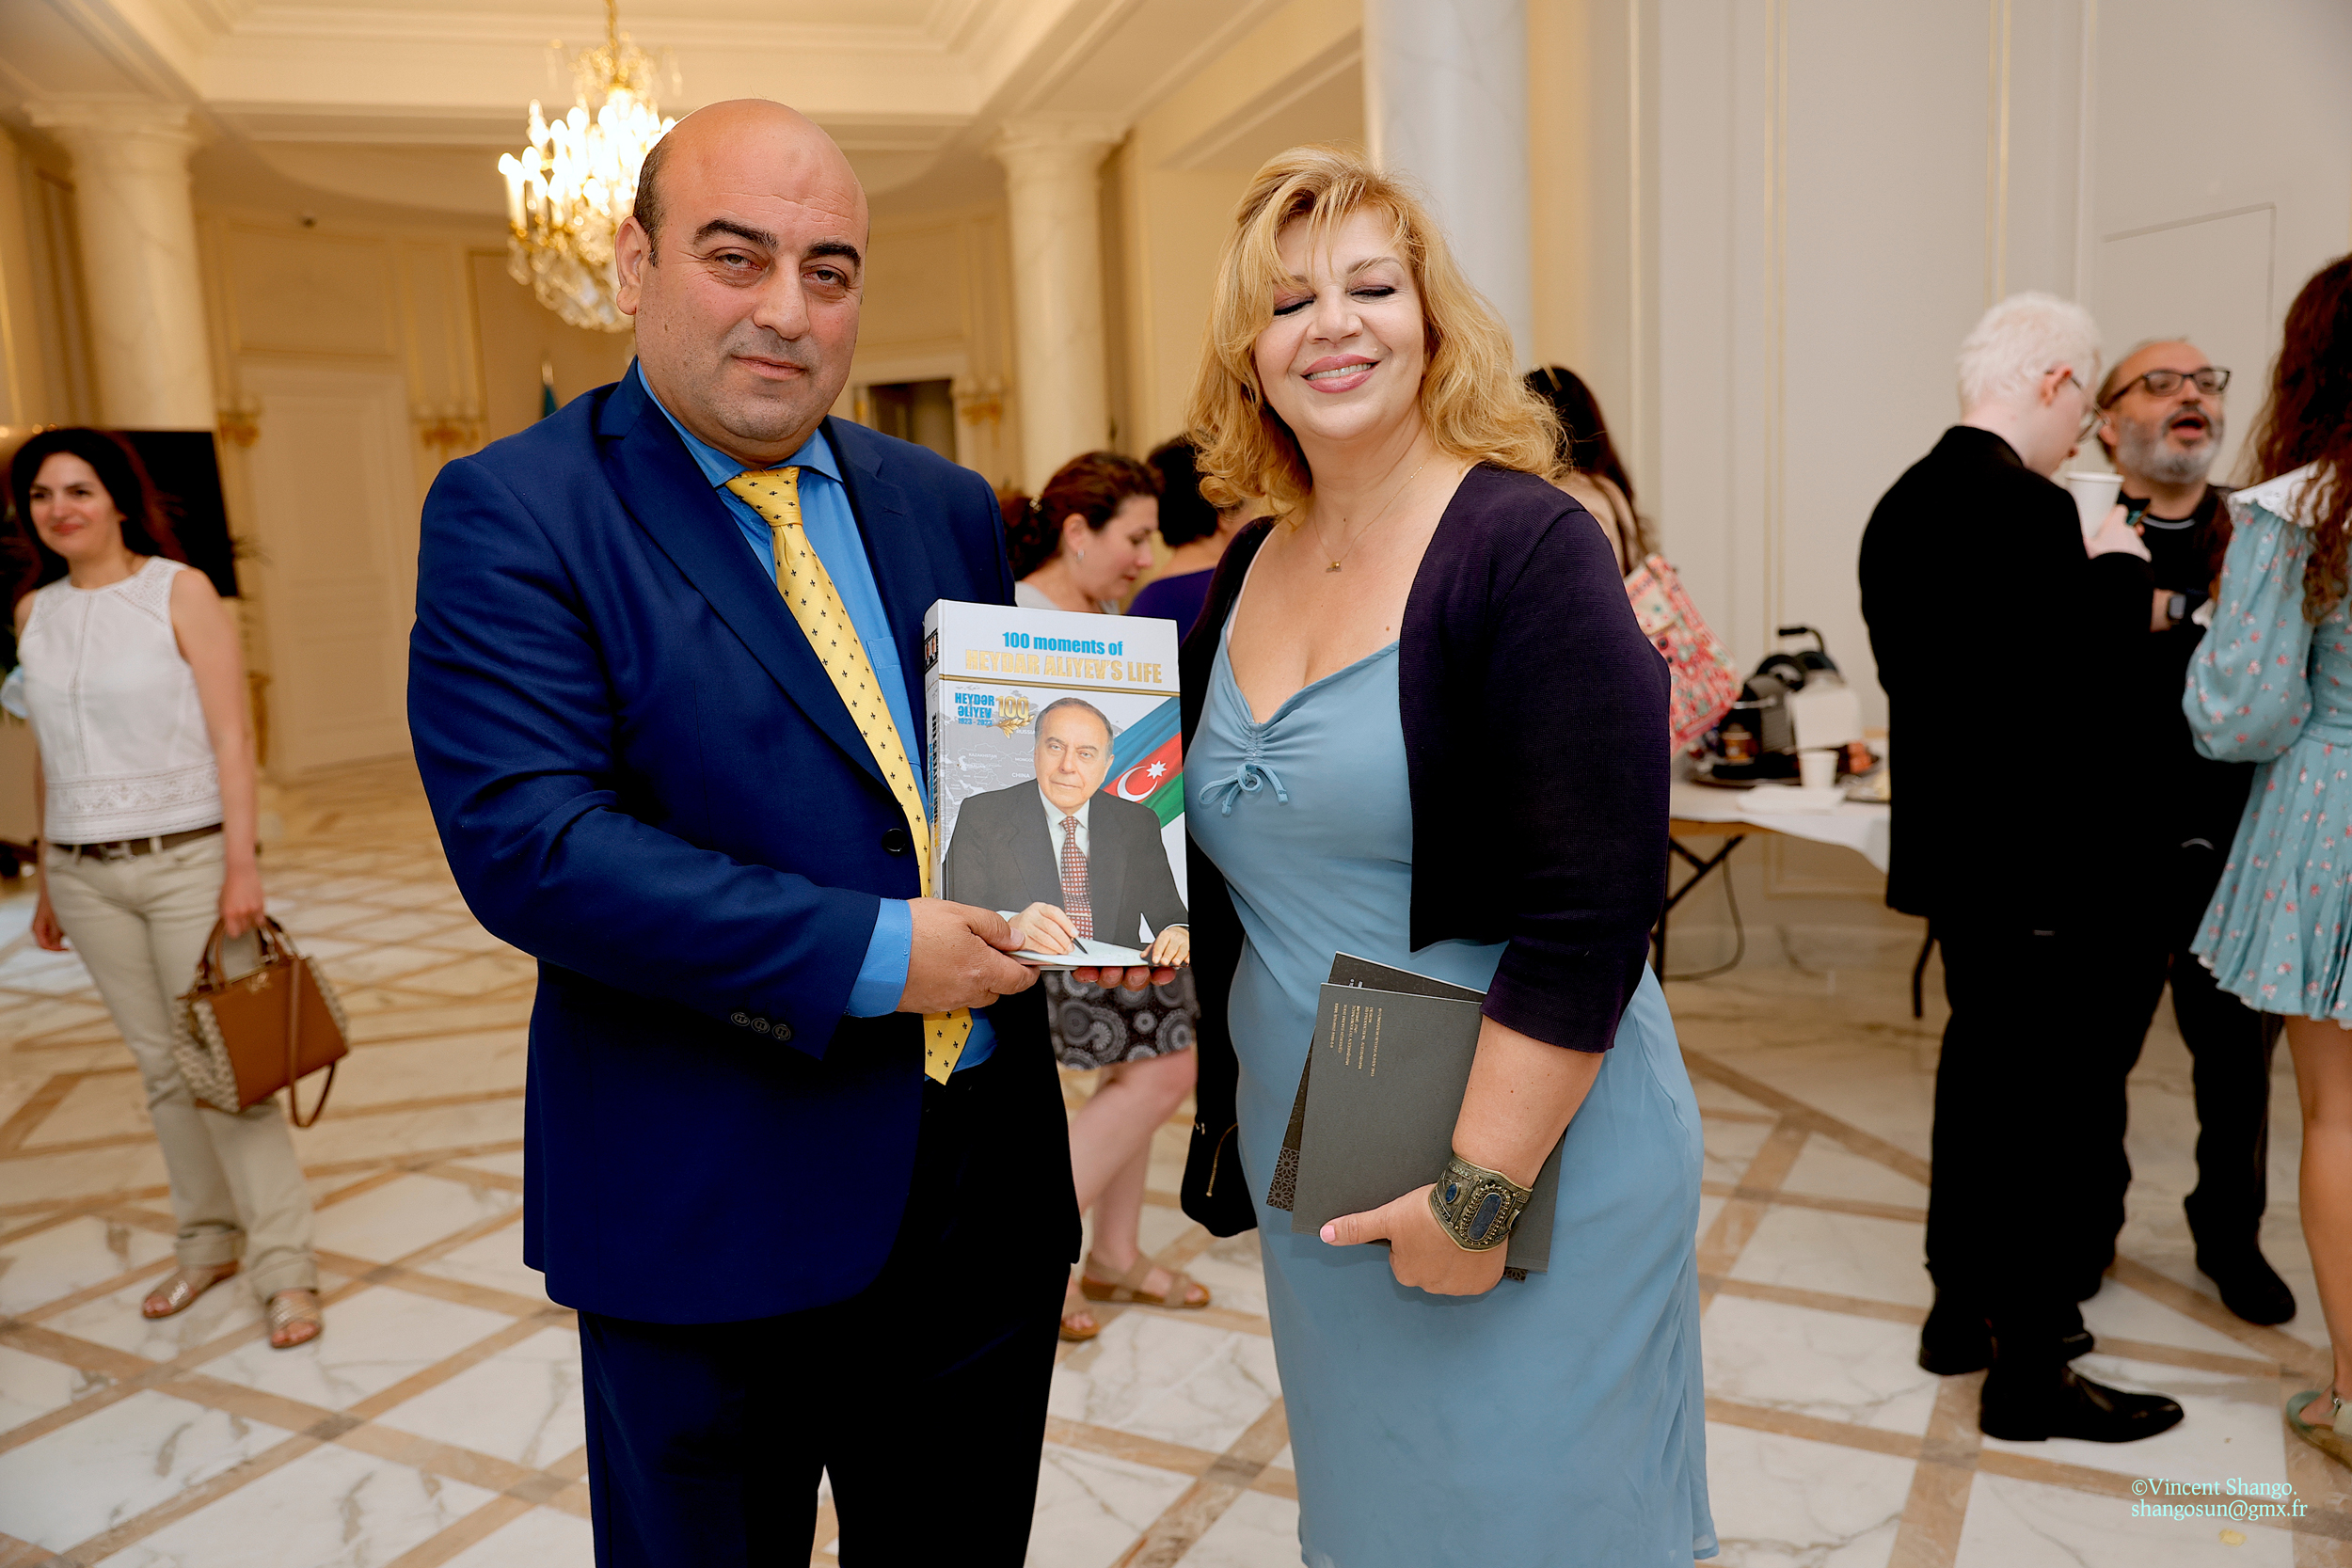 100-Moments-of-Heydar-Aliyev's-Life-book-Emin-Nasirli-is-the-author-and-editor-of-Mon-Azerbaïdjan-Magazine-Special Guest